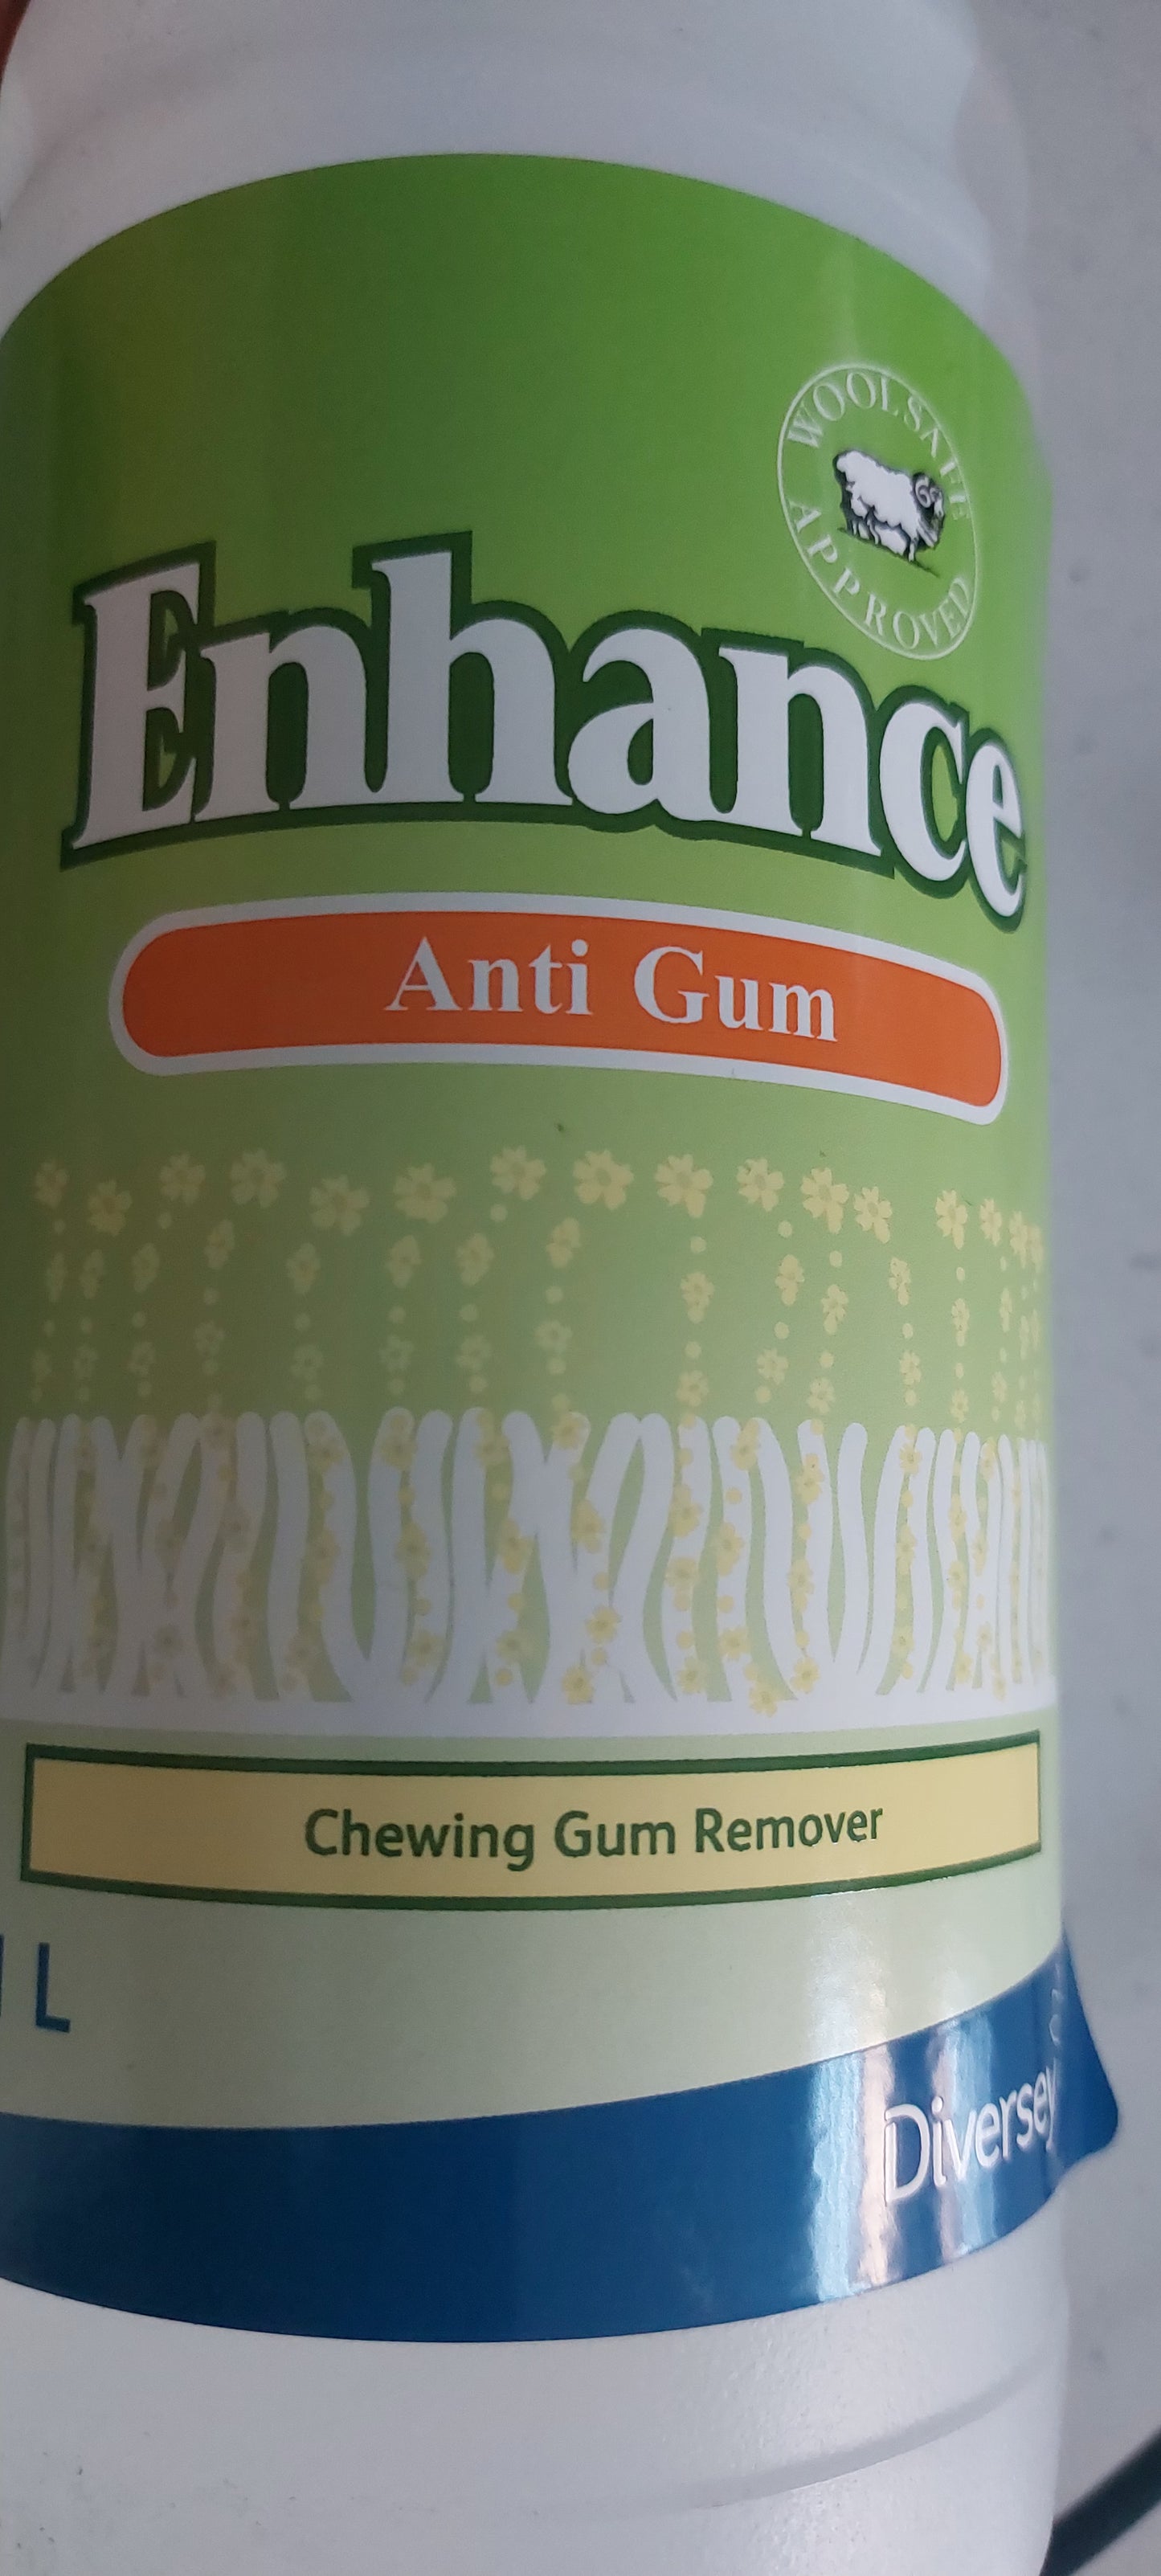 Resume packing 4th March - In Stock Enhance Anti Gum 1ltr